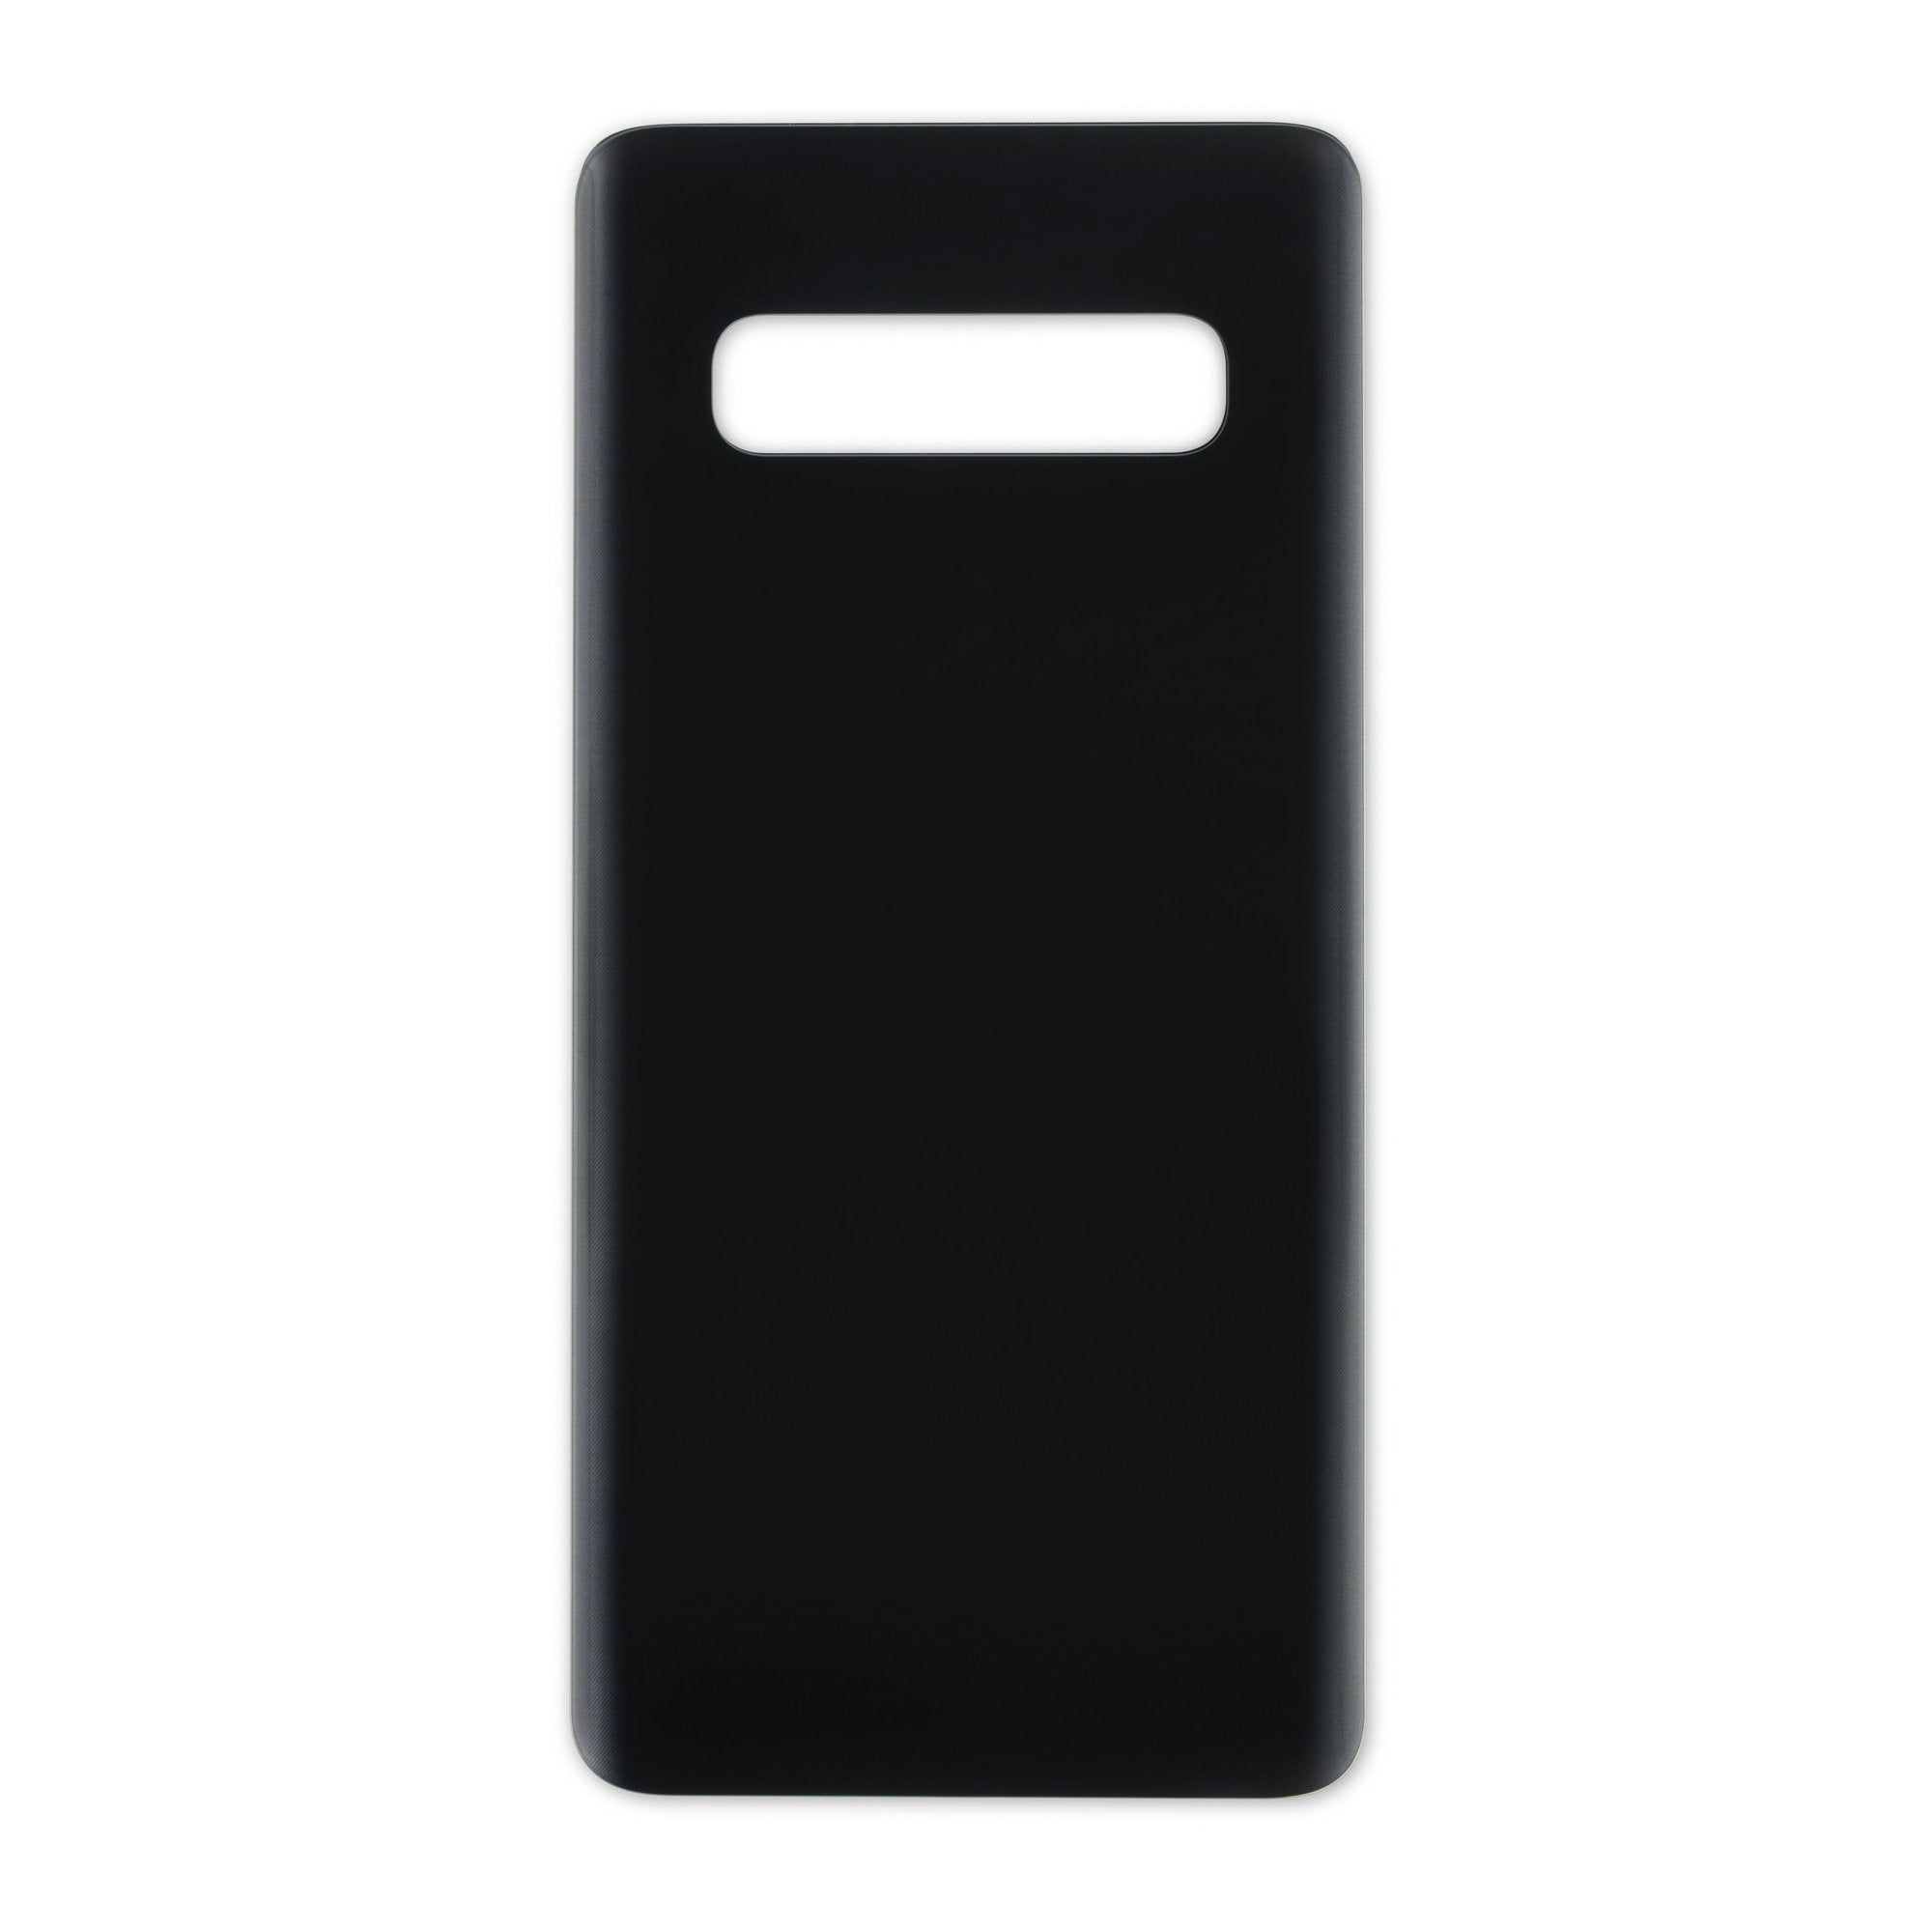 Galaxy S10 Rear Glass Panel/Cover Black New